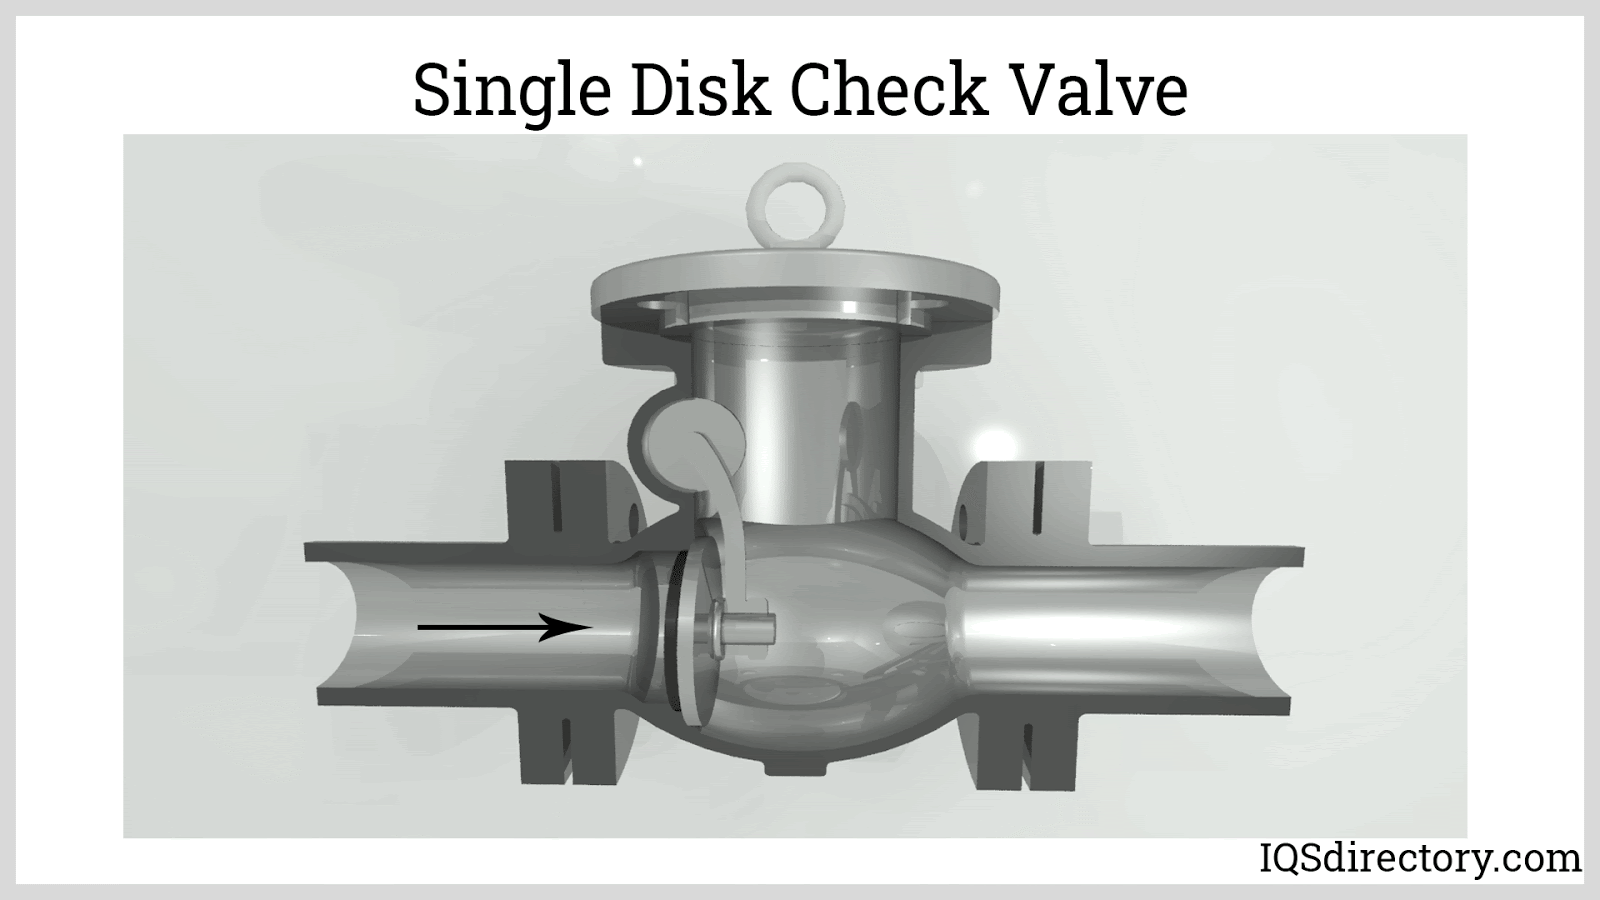 Double Check Valve Assembly - How It Works 